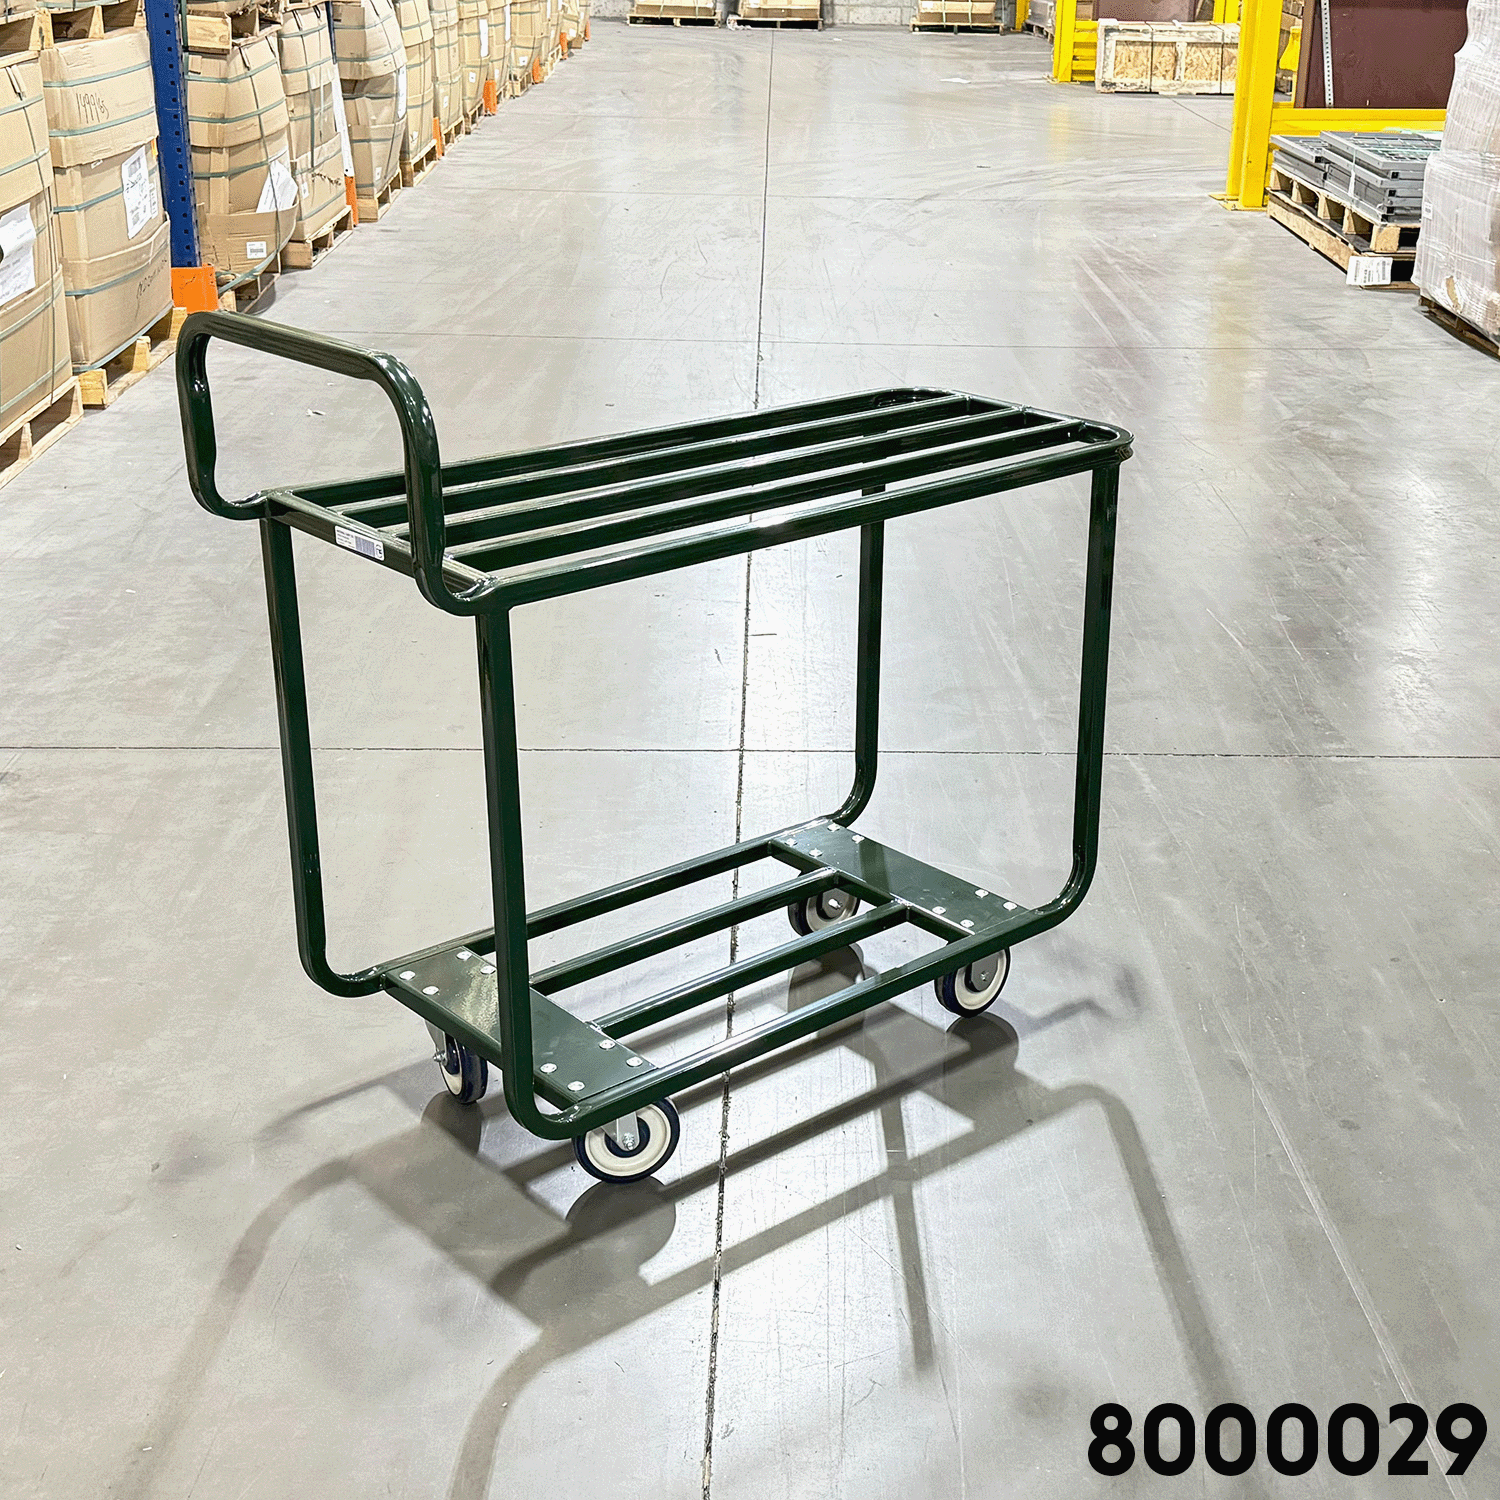 nest dollies industrial cart nesting picking cart NSF cart NSF rack NSF approved NSF certified National Sanitation Foundation tray shelf Distribution Cart picking cart tray shelf picking cart, picking cart, ecom cart, ecommerce cart, ecommerce picking cart, picking cart, INDUSTRIAL CARTS, grocery cart grocery picking cart, department store cart, beverage cart NSF approved. This food service cart meets strict standards and procedures imposed by NSF. lug cart meat department, produce department bakery cart bakery rack bakery carts bakery racks meat rack meat cart sushi cart salad bar cart deli cart stream table cart buffet cart